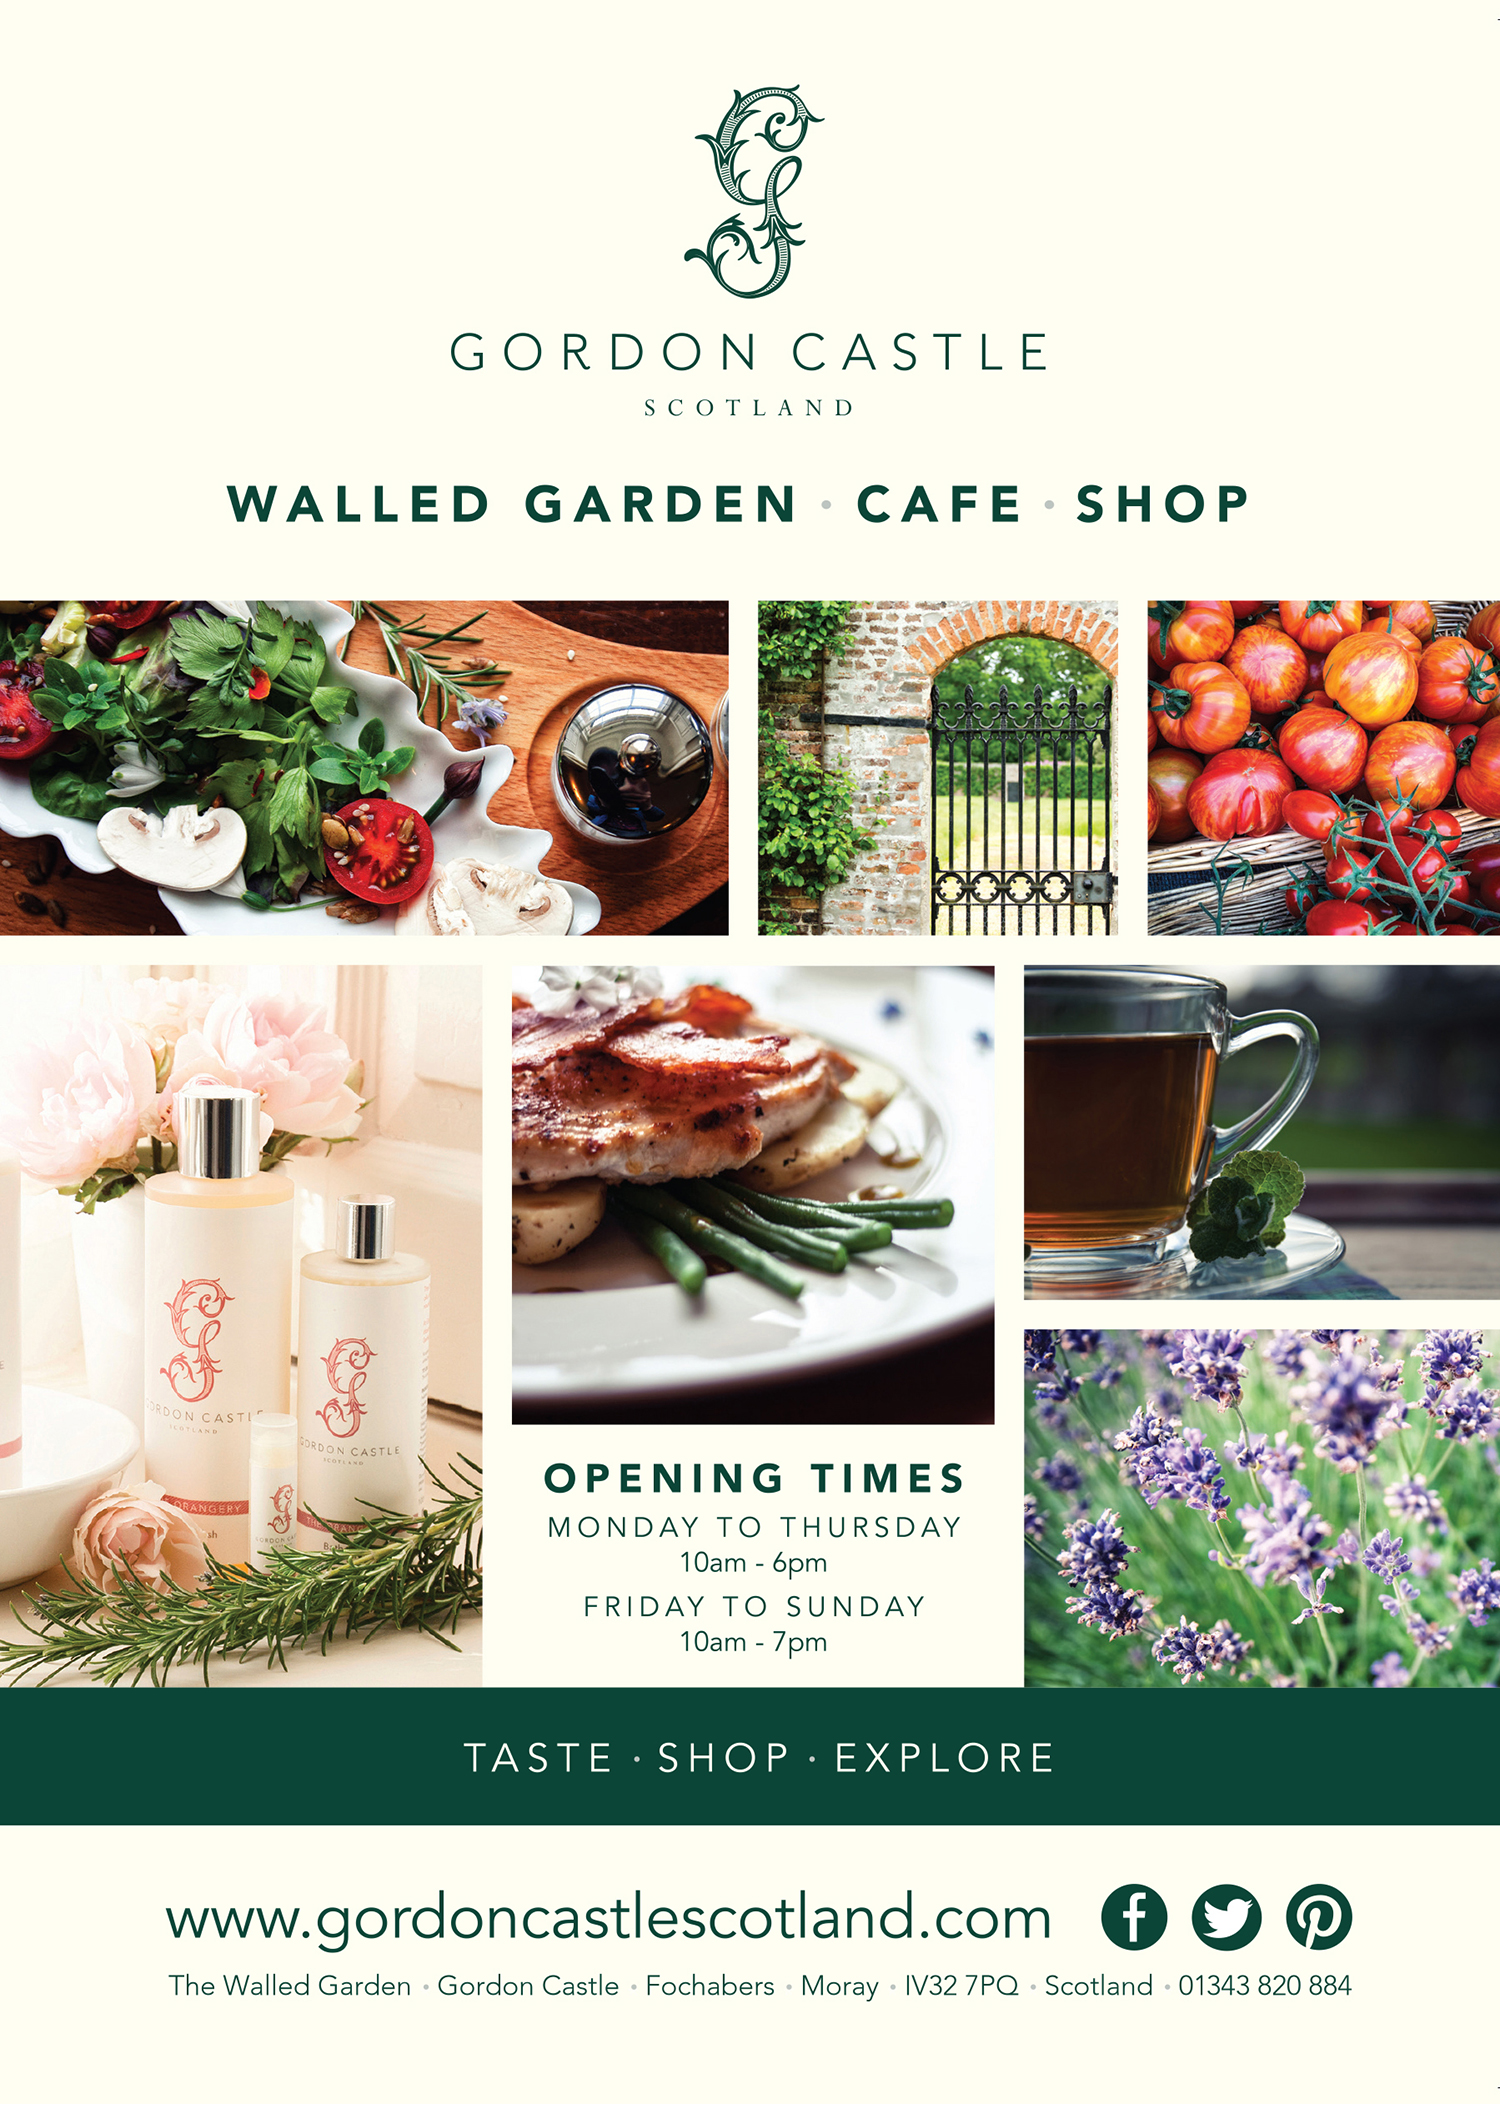 Giles Lawson Johnston, COO, The Walled Garden Trading Co Ltd: